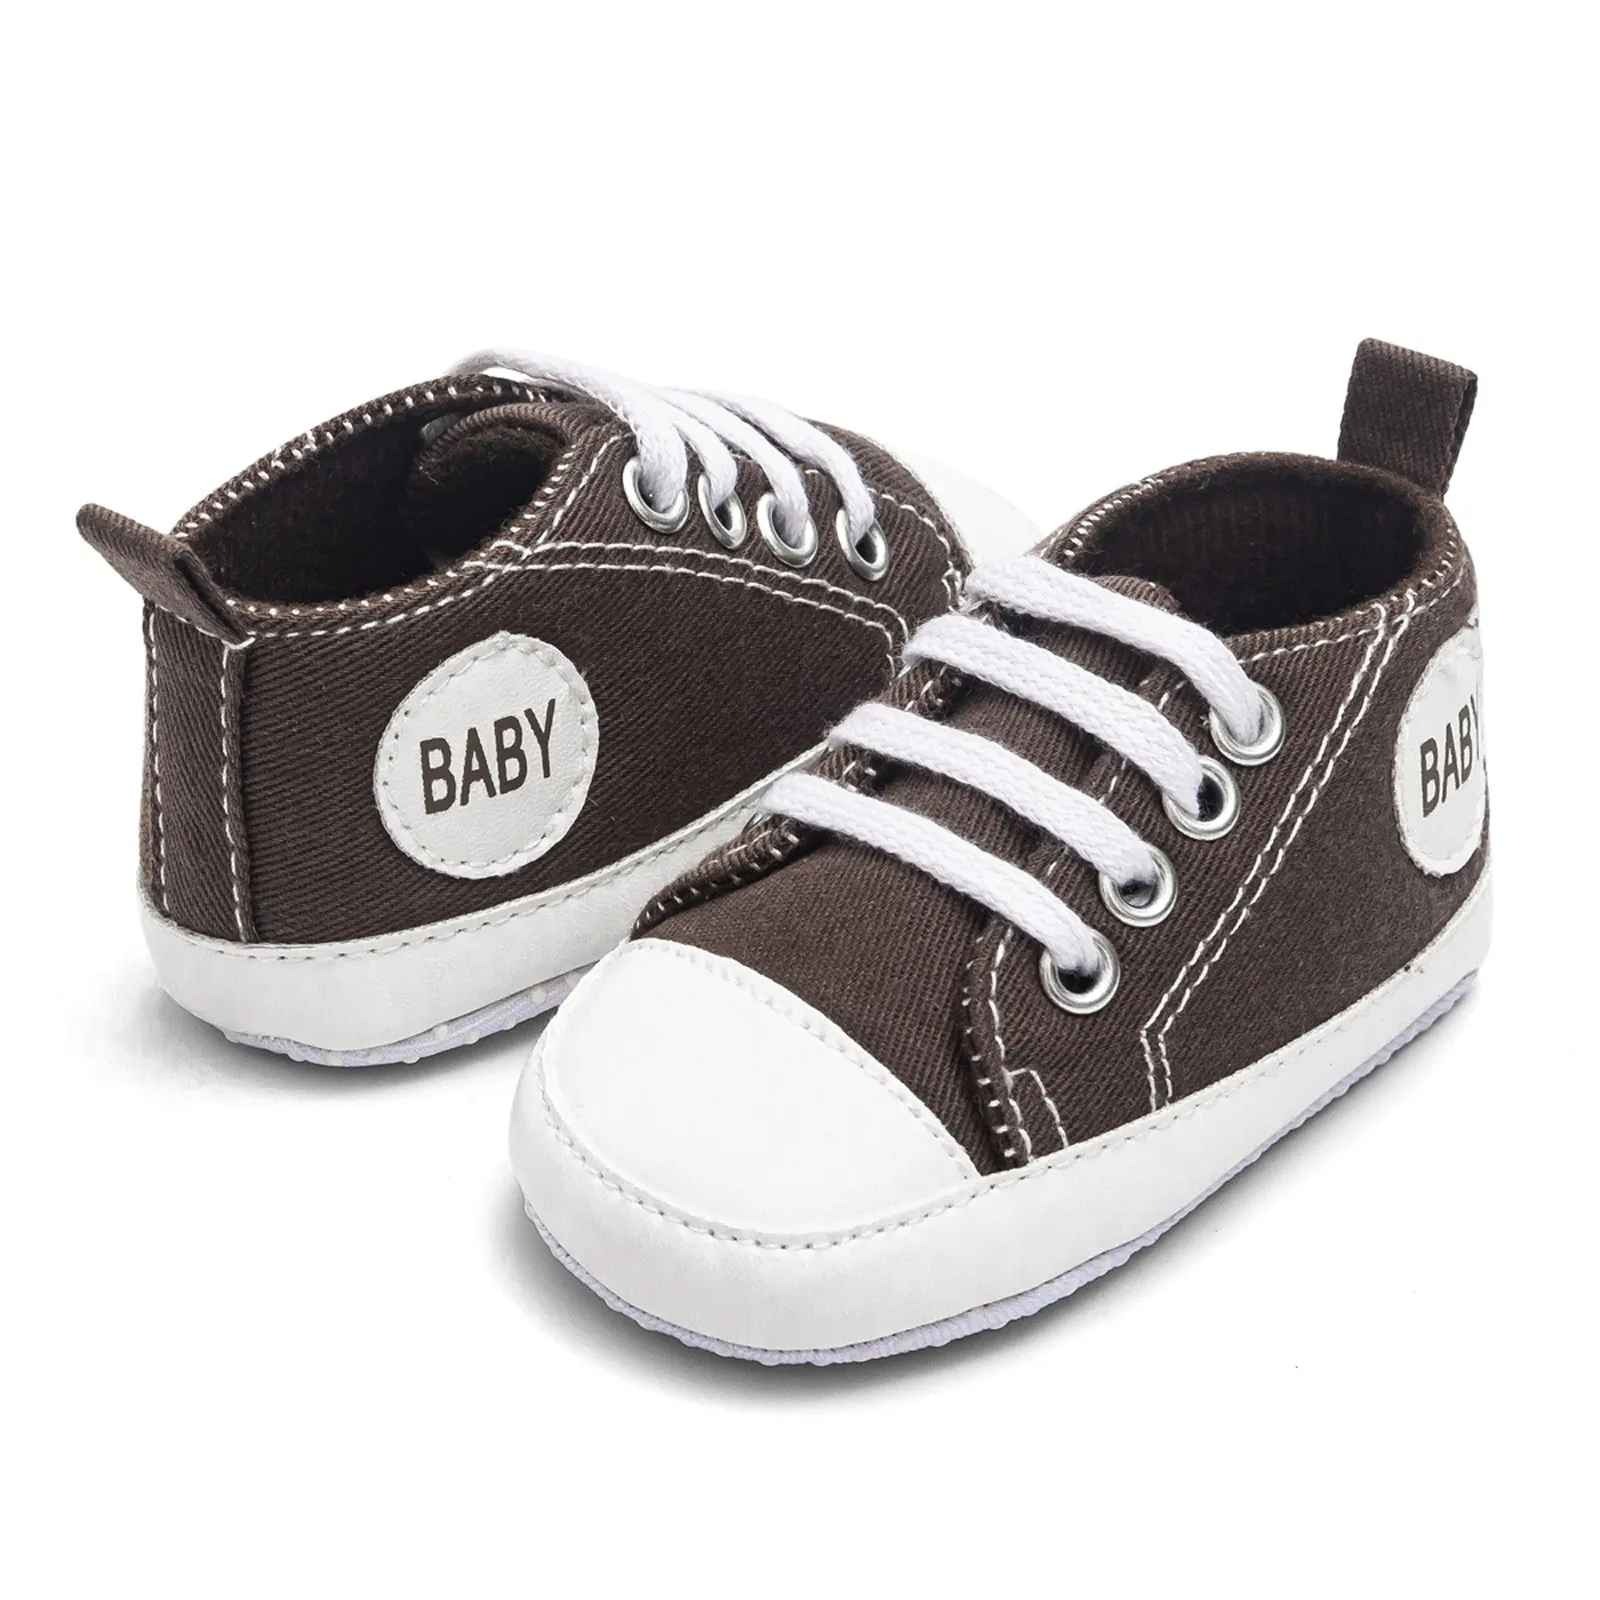 

Baby Canvas Classic Sports Sneakers Newborn Baby Boys Girls Print Star First Walkers Shoes Infant Toddler Anti-slip Baby Shoes